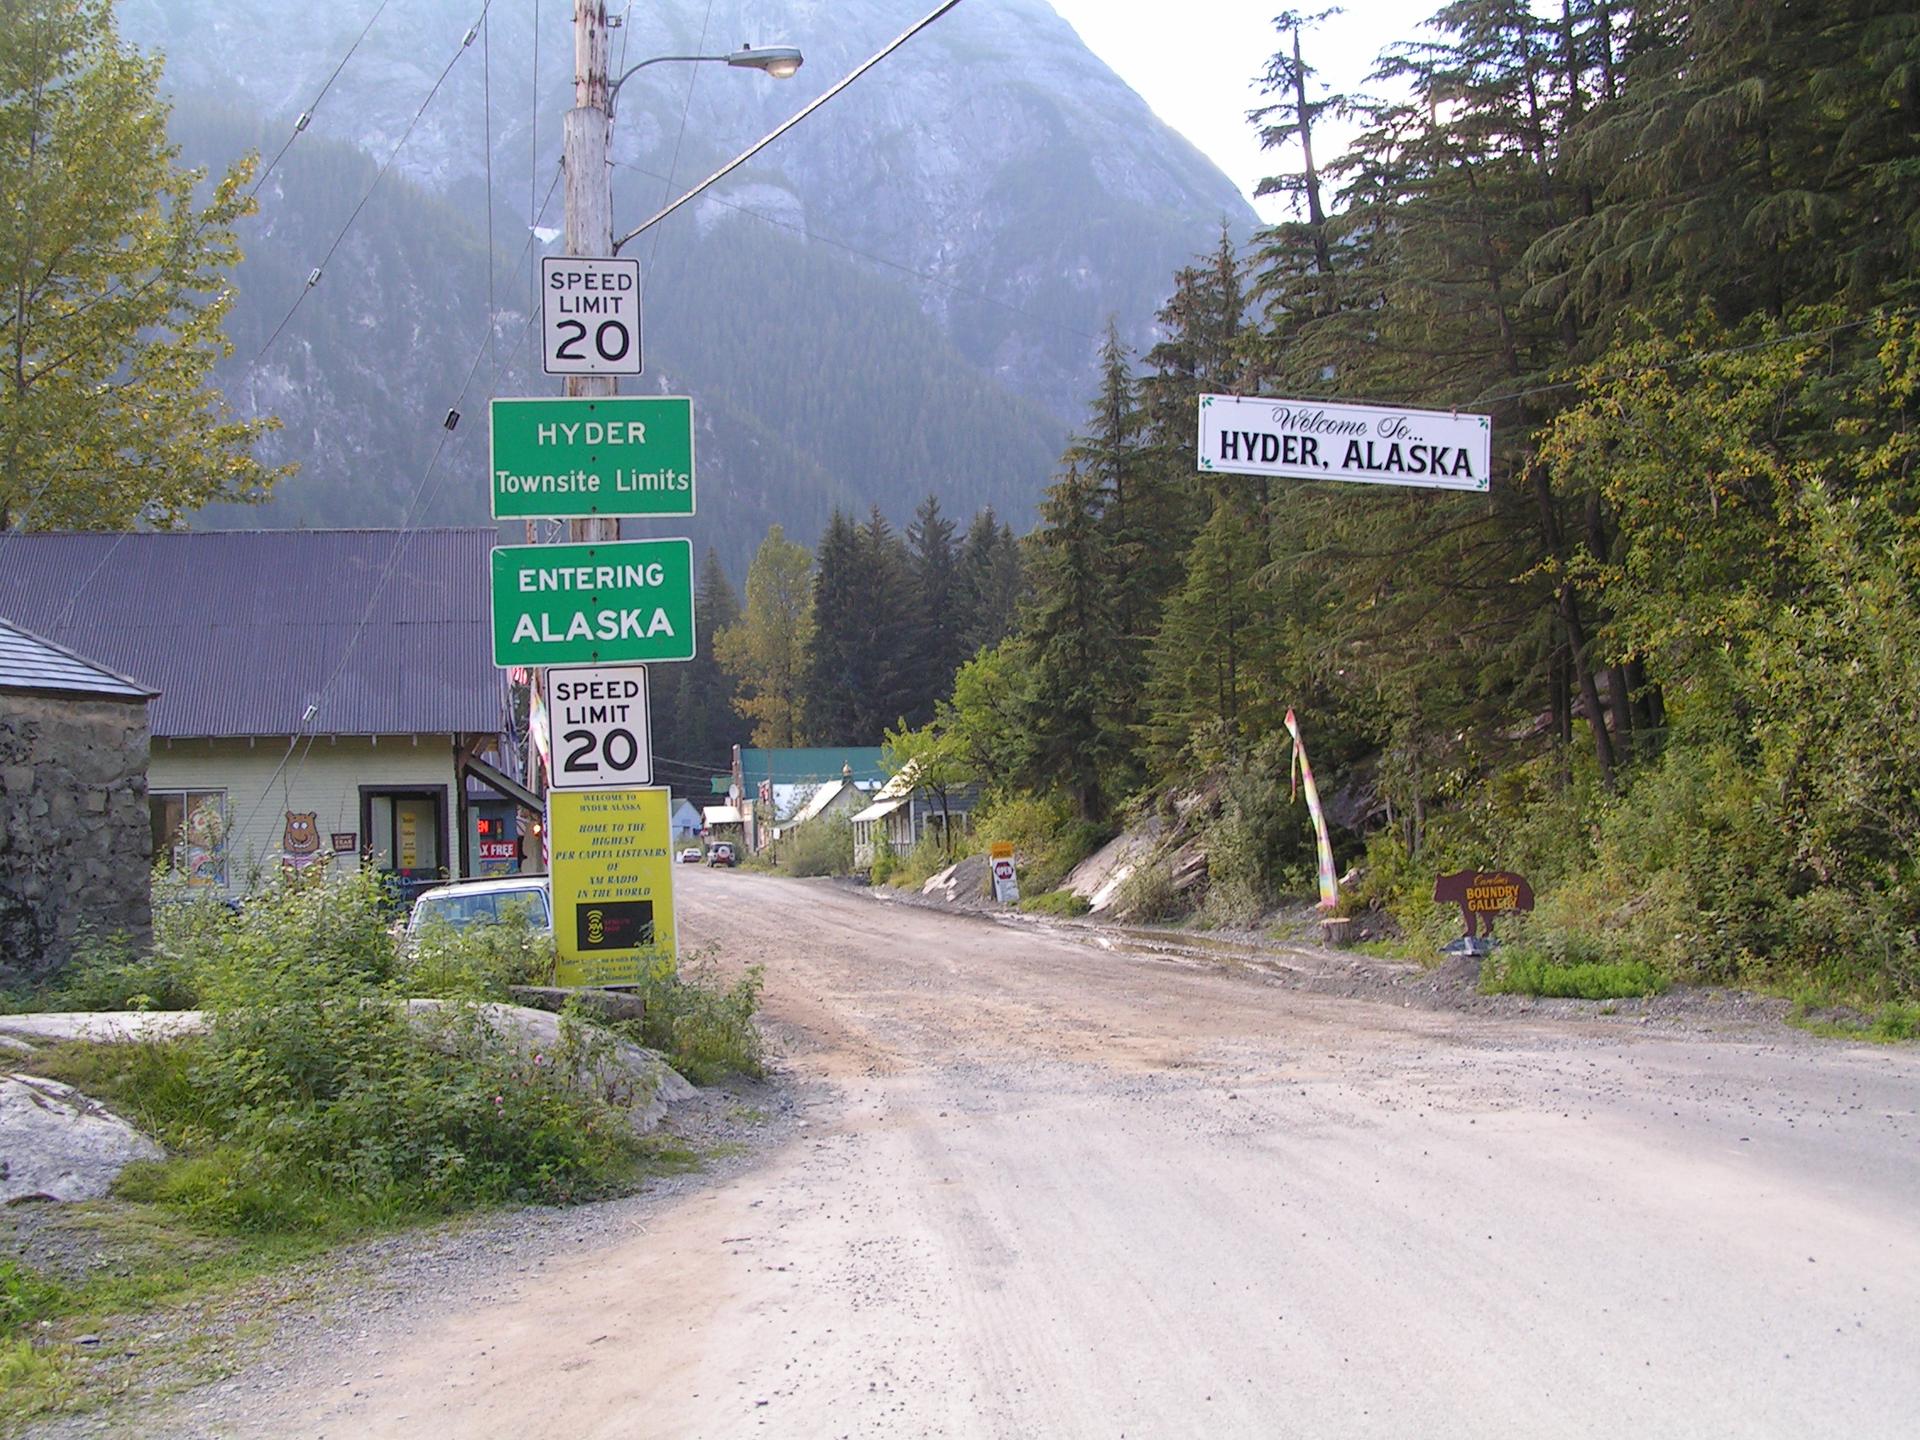 The border between Stewart, British Columbia and Hyder, Alaska as seen from the Canadian side.